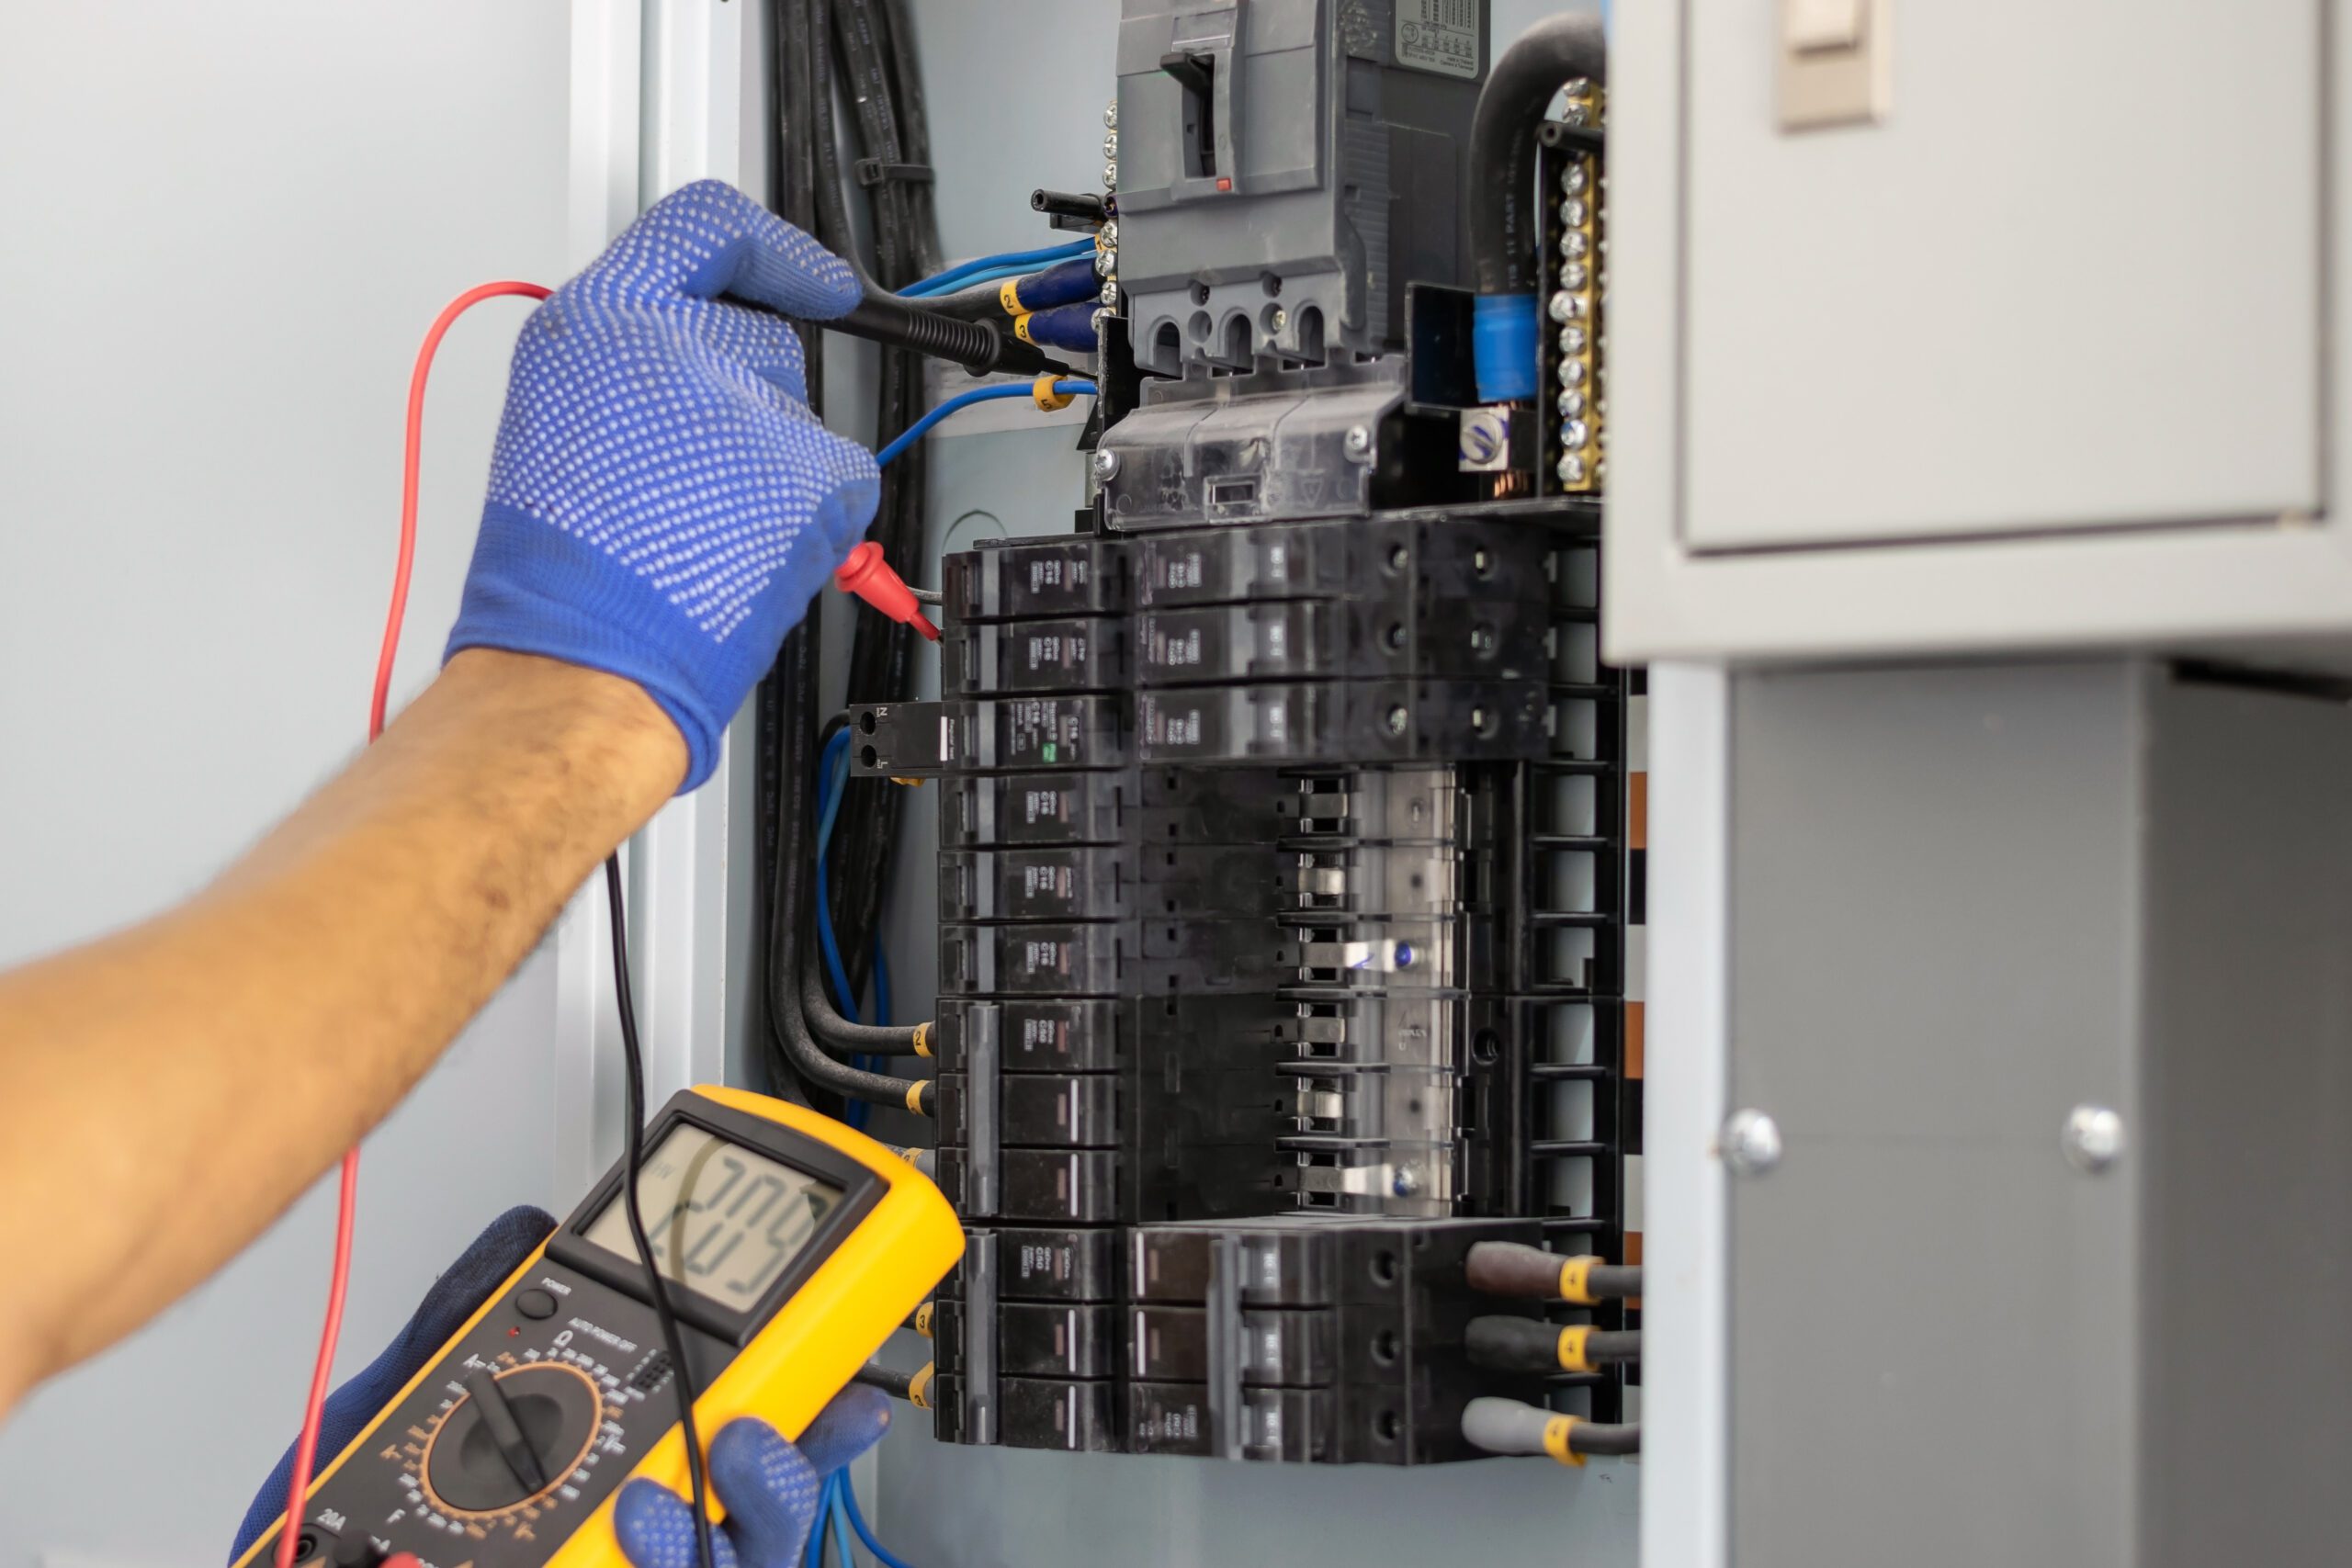 Residential electrical panel and breaker box repair services in Houston